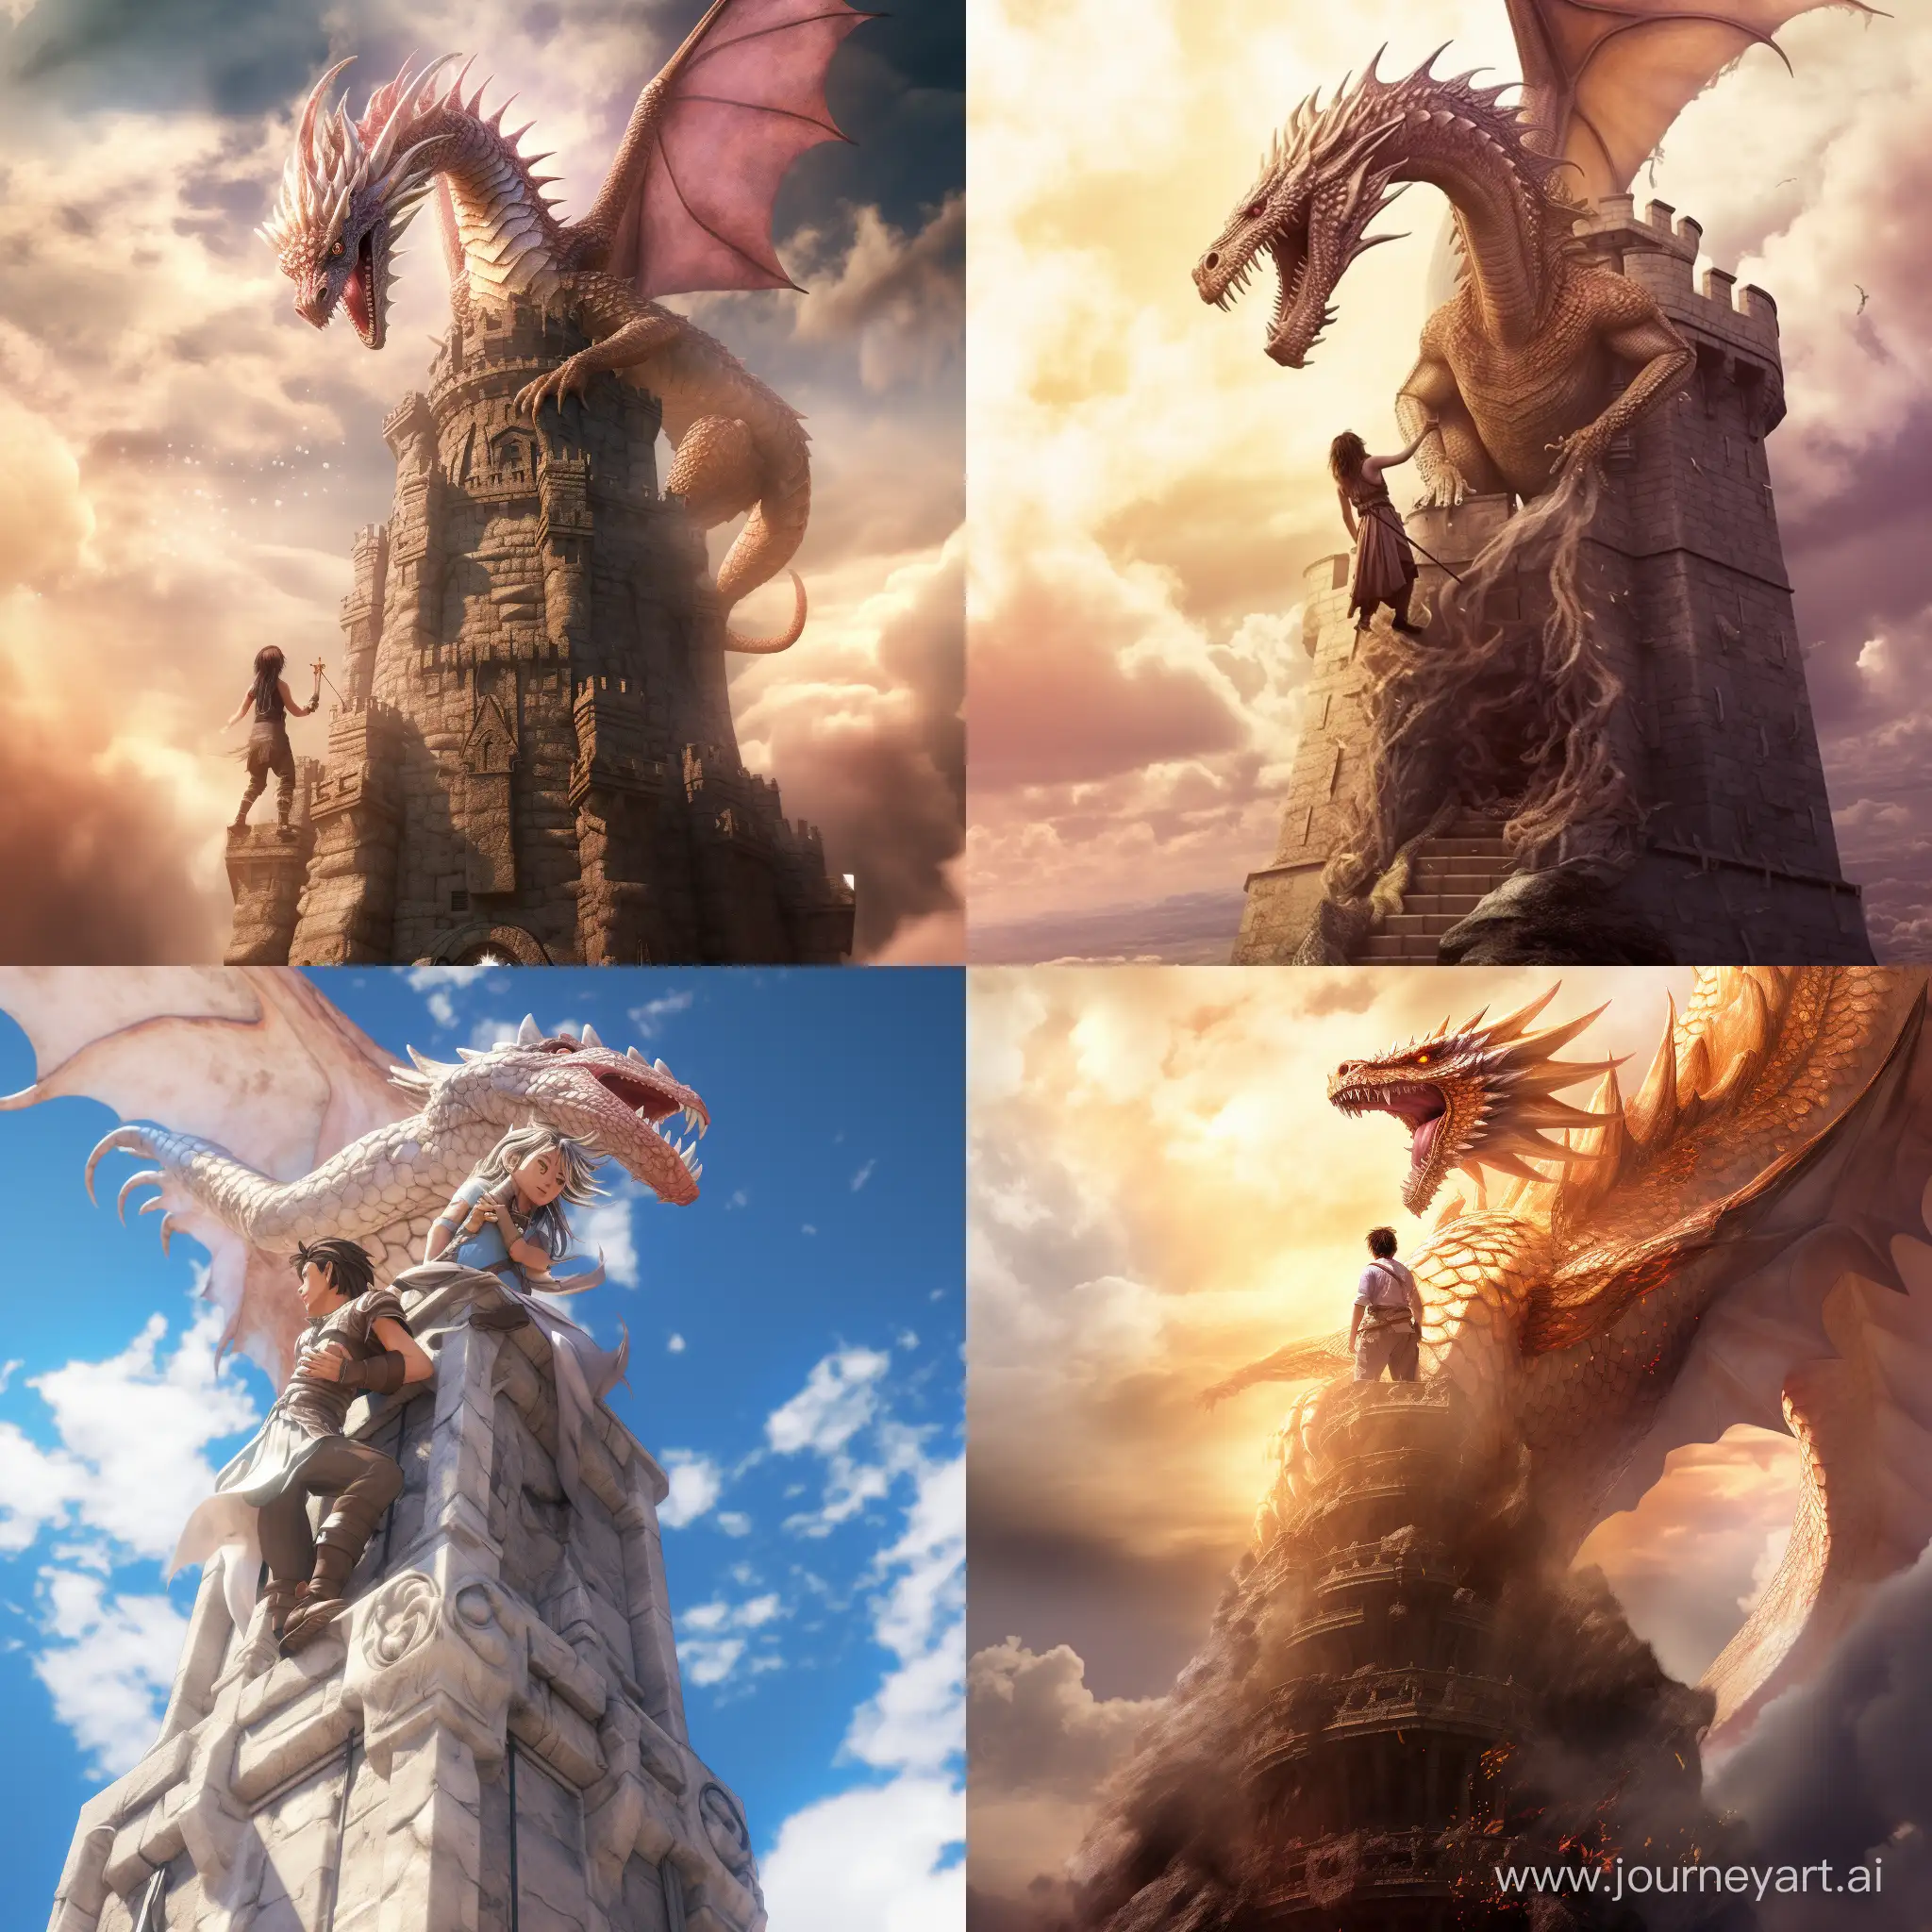 a photo of a man climbing a tower to save a quenn. The quenn is on the top of the tower. a dragon tries to take down the brave man who climbs the tower to save the princess